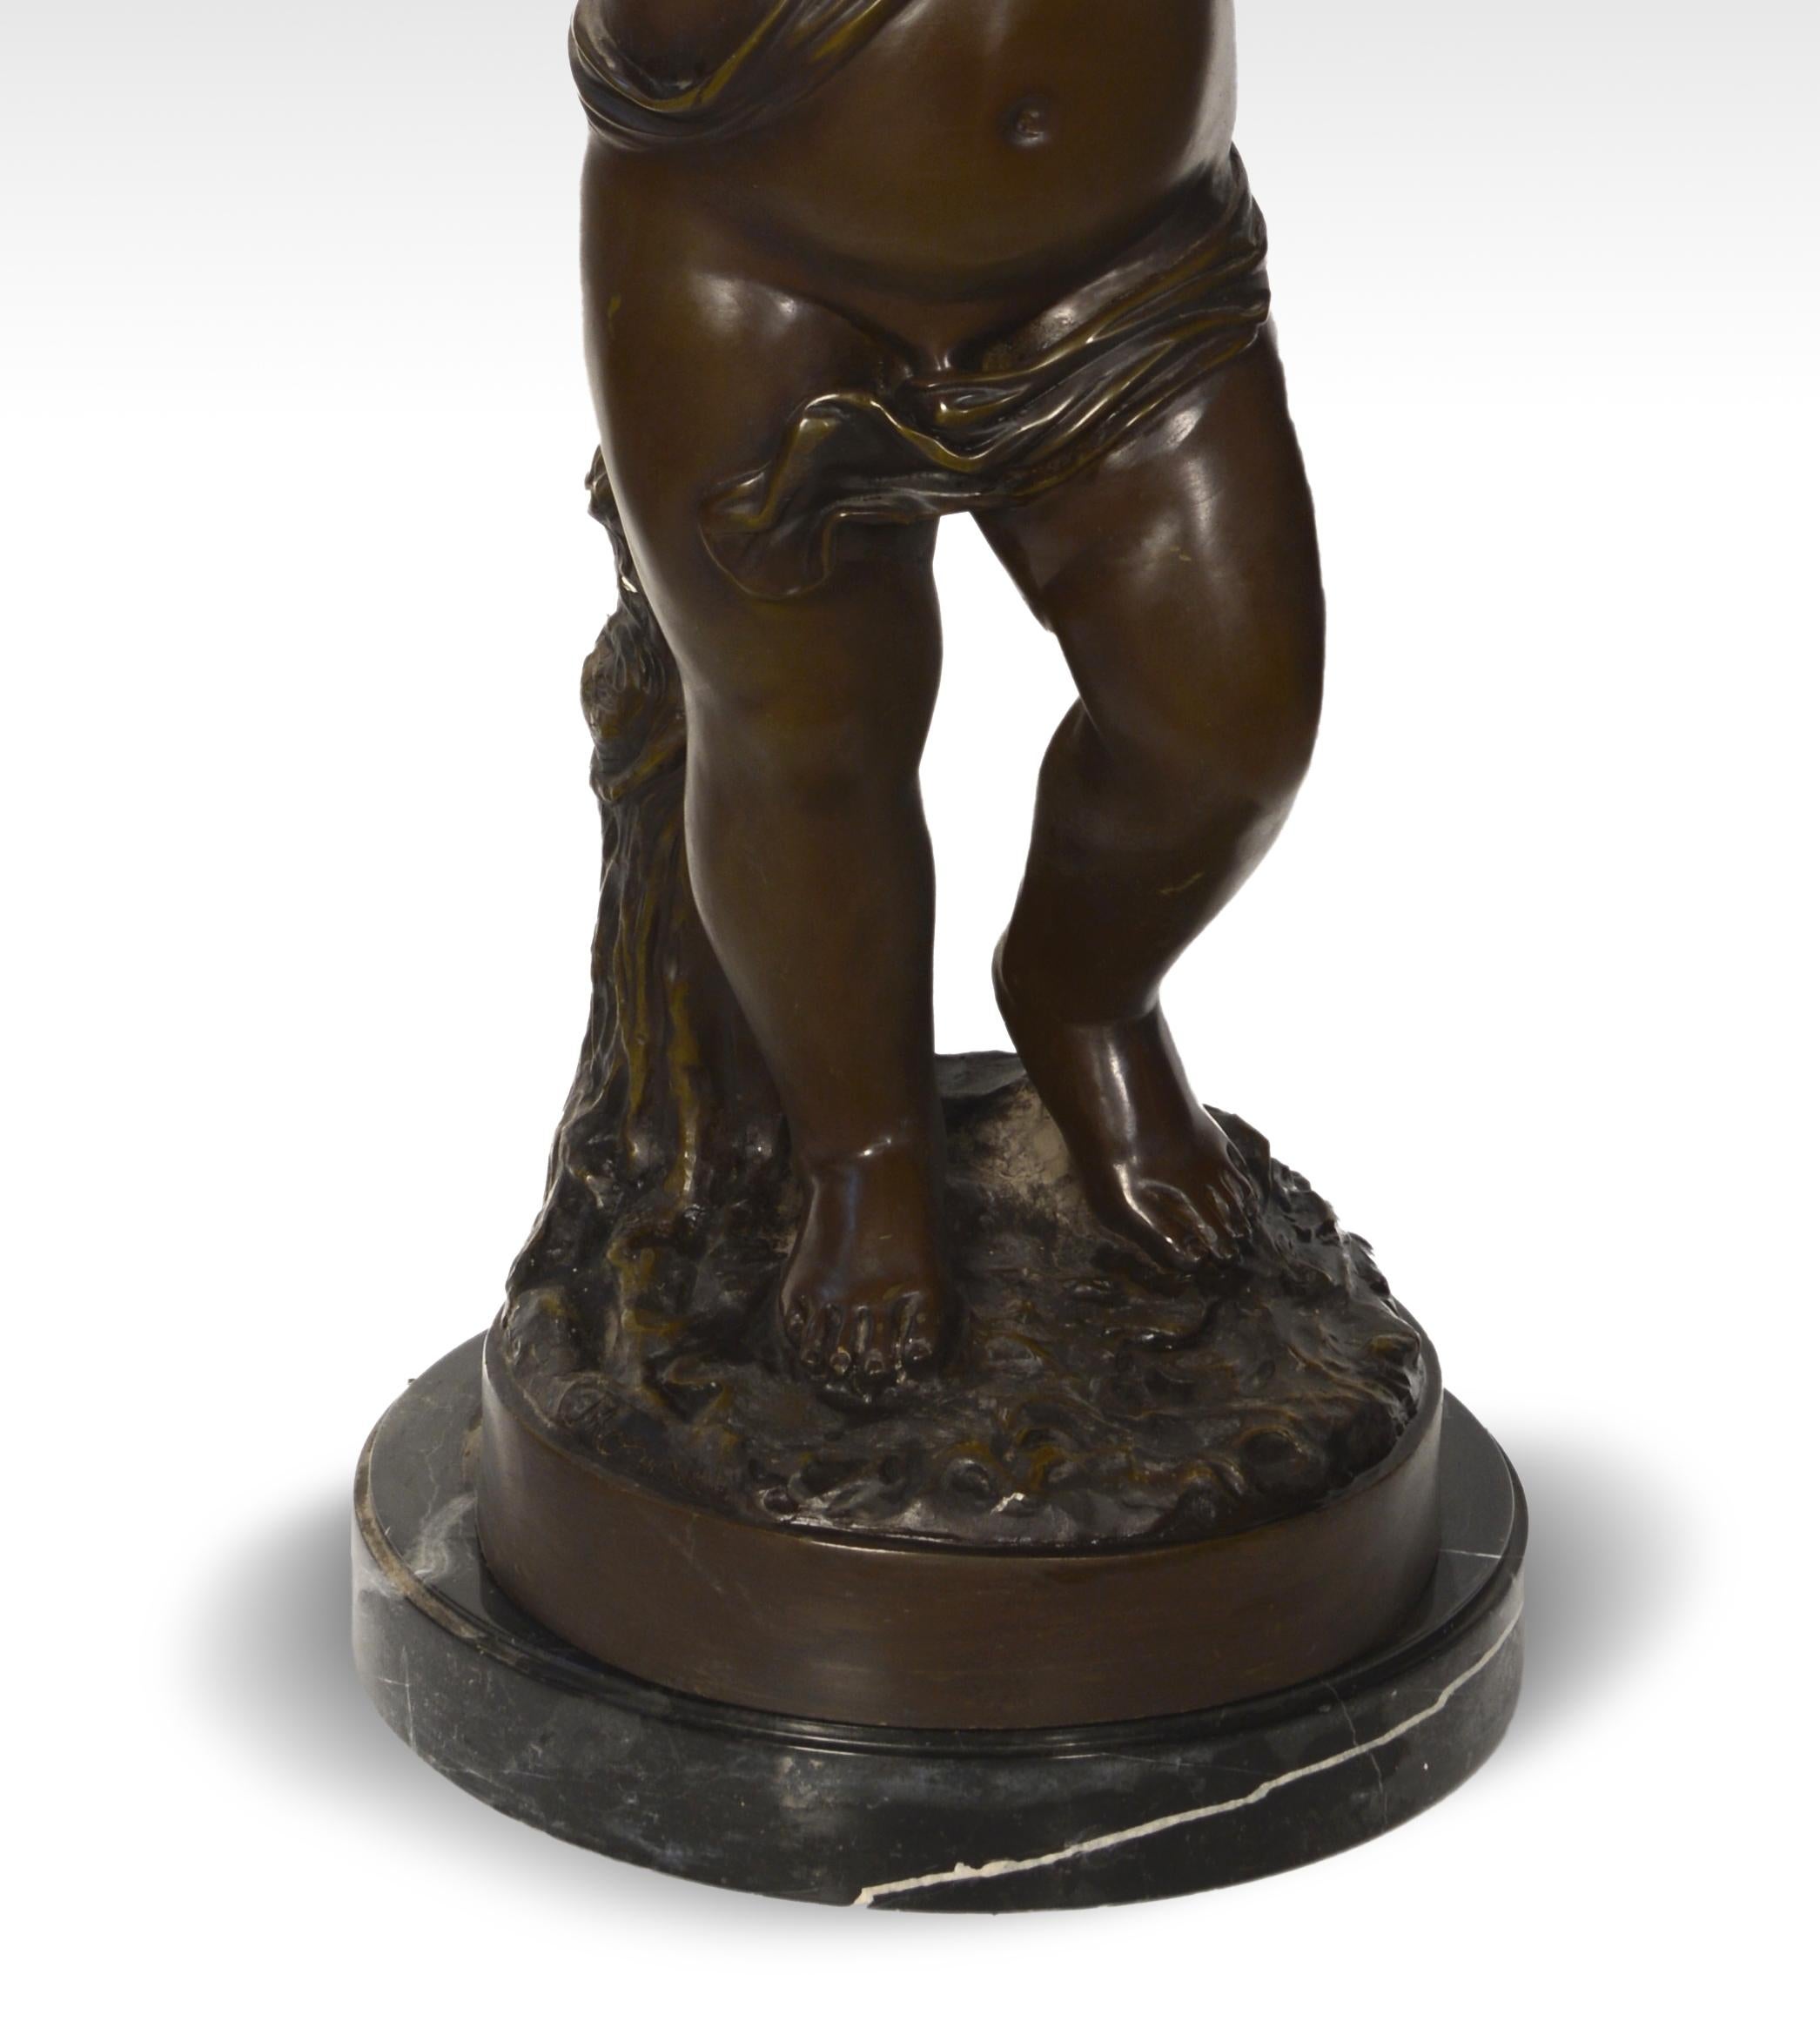 Lamp “Child torchière”. Bronze, 20th century.
Bronze sculpture adapted so it can work as a lamp, after Neoclassical models like the well-known “Enfant Torchère” by August Moreau (1834-1817). 
Measures: 30x30x127 cms.
International Buyers – Please